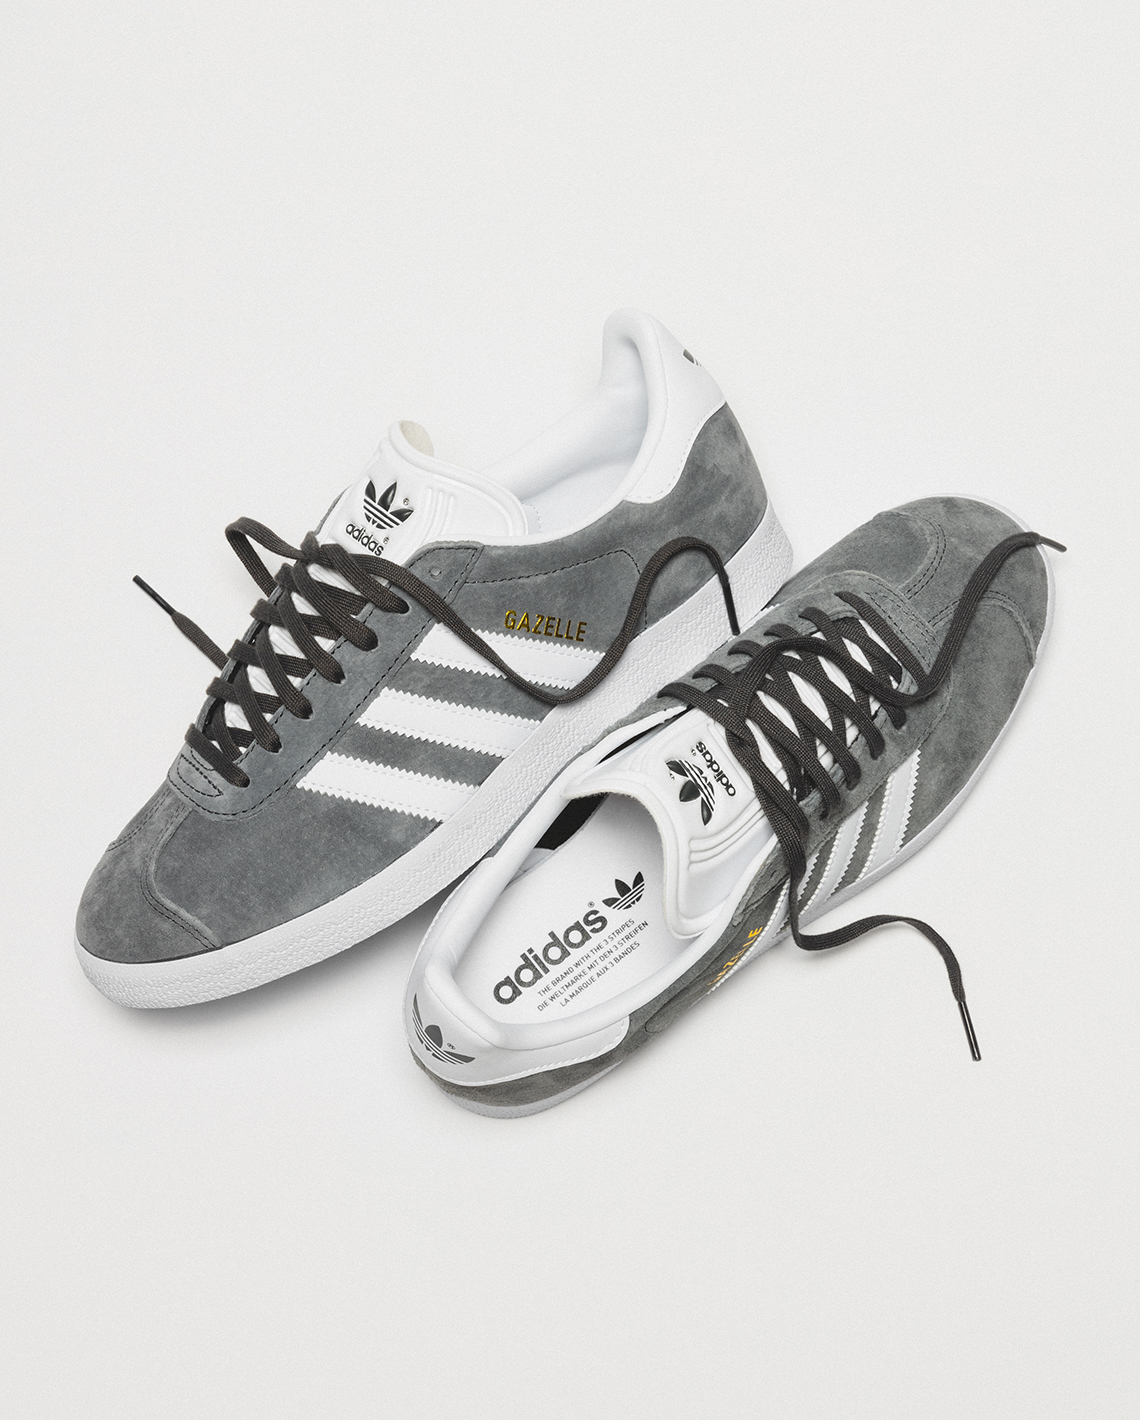 Cool Adidas Shoes for Spring Outfits – Top Editor's Picks